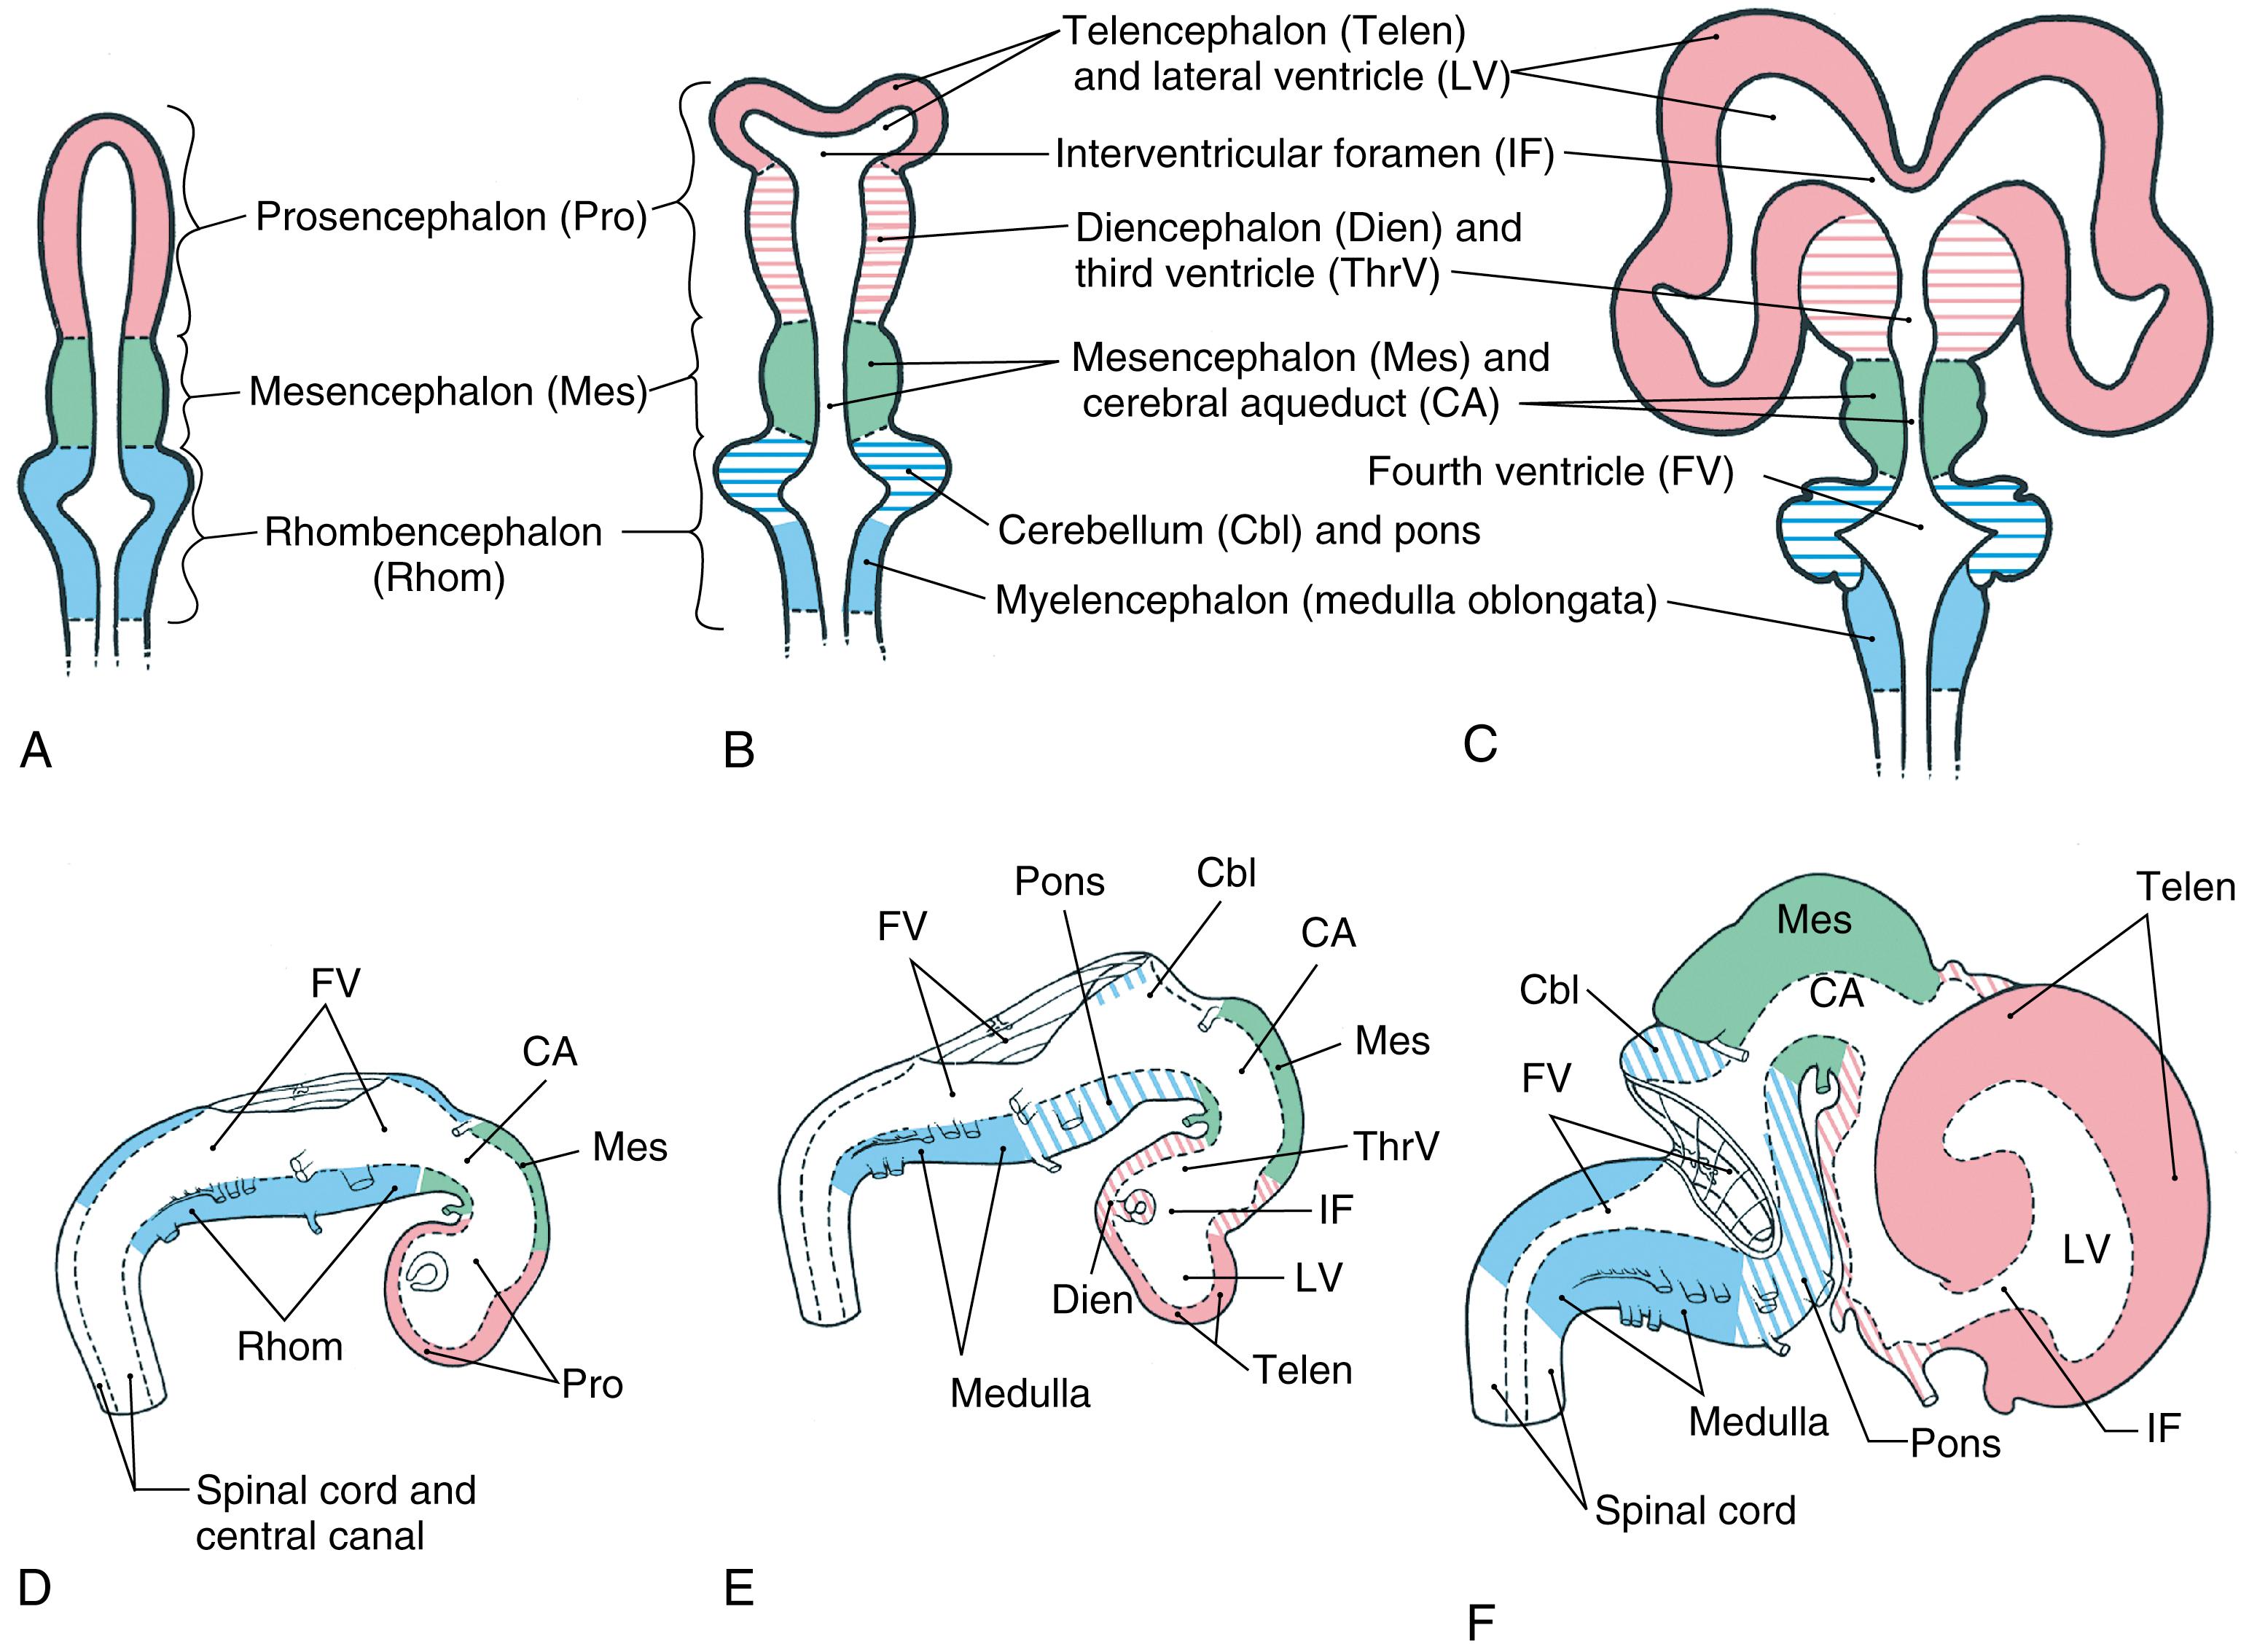 Fig. 6.1, The early development of the brain and ventricular system, showing how brain growth and the configuration of the ventricles interrelate. Diagrammatic dorsal views ( A-C ) correlate in general with lateral views ( D-F ) at about 5 weeks ( D ), 6 weeks ( E ), and 8.5 weeks ( F ) of gestation. The outlines of the ventricles are shown in D to F as dashed lines.